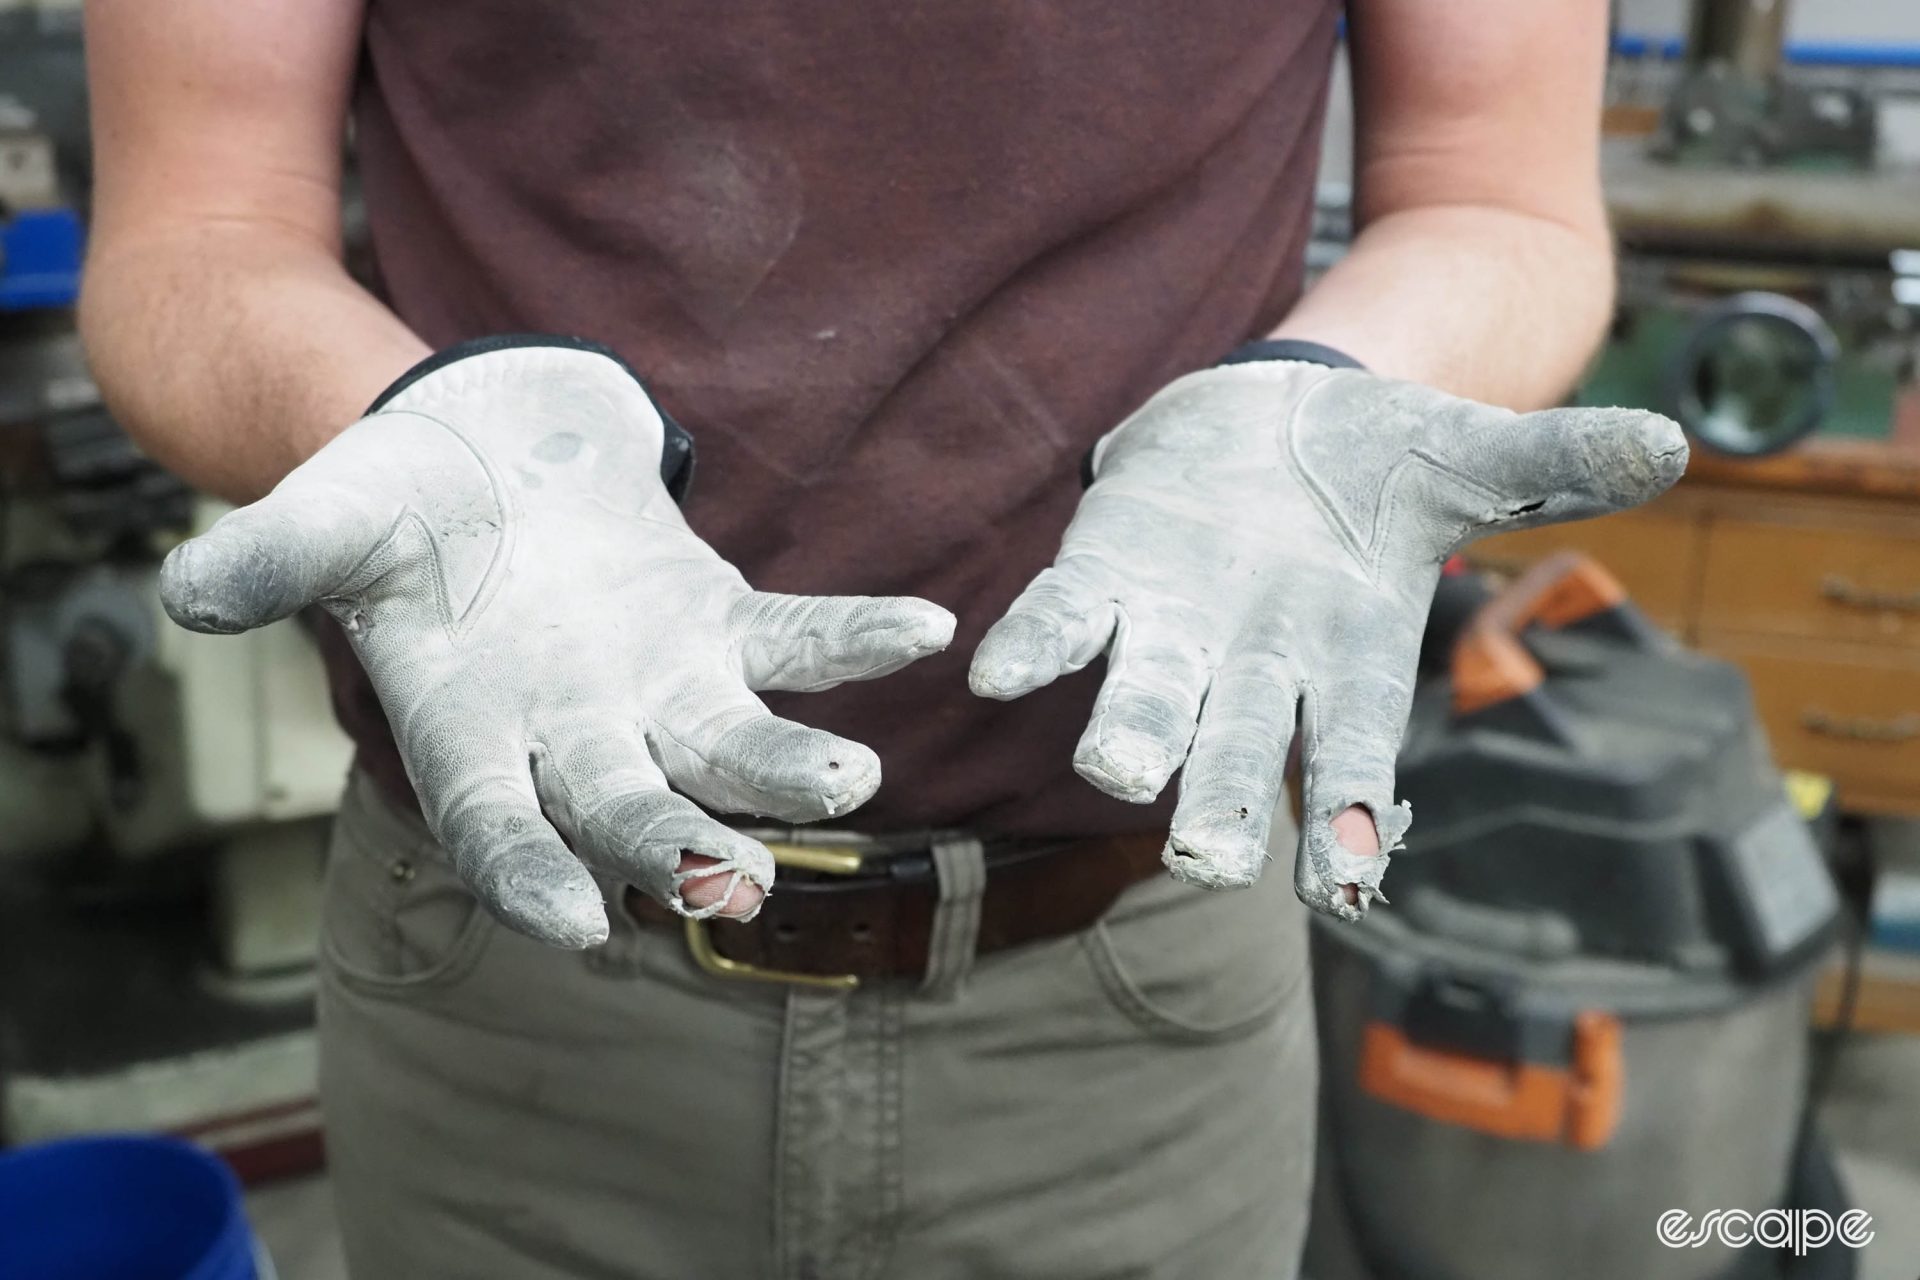 Aaron Barcheck holds his hands out to show weathered gloves with holes in several fingers.